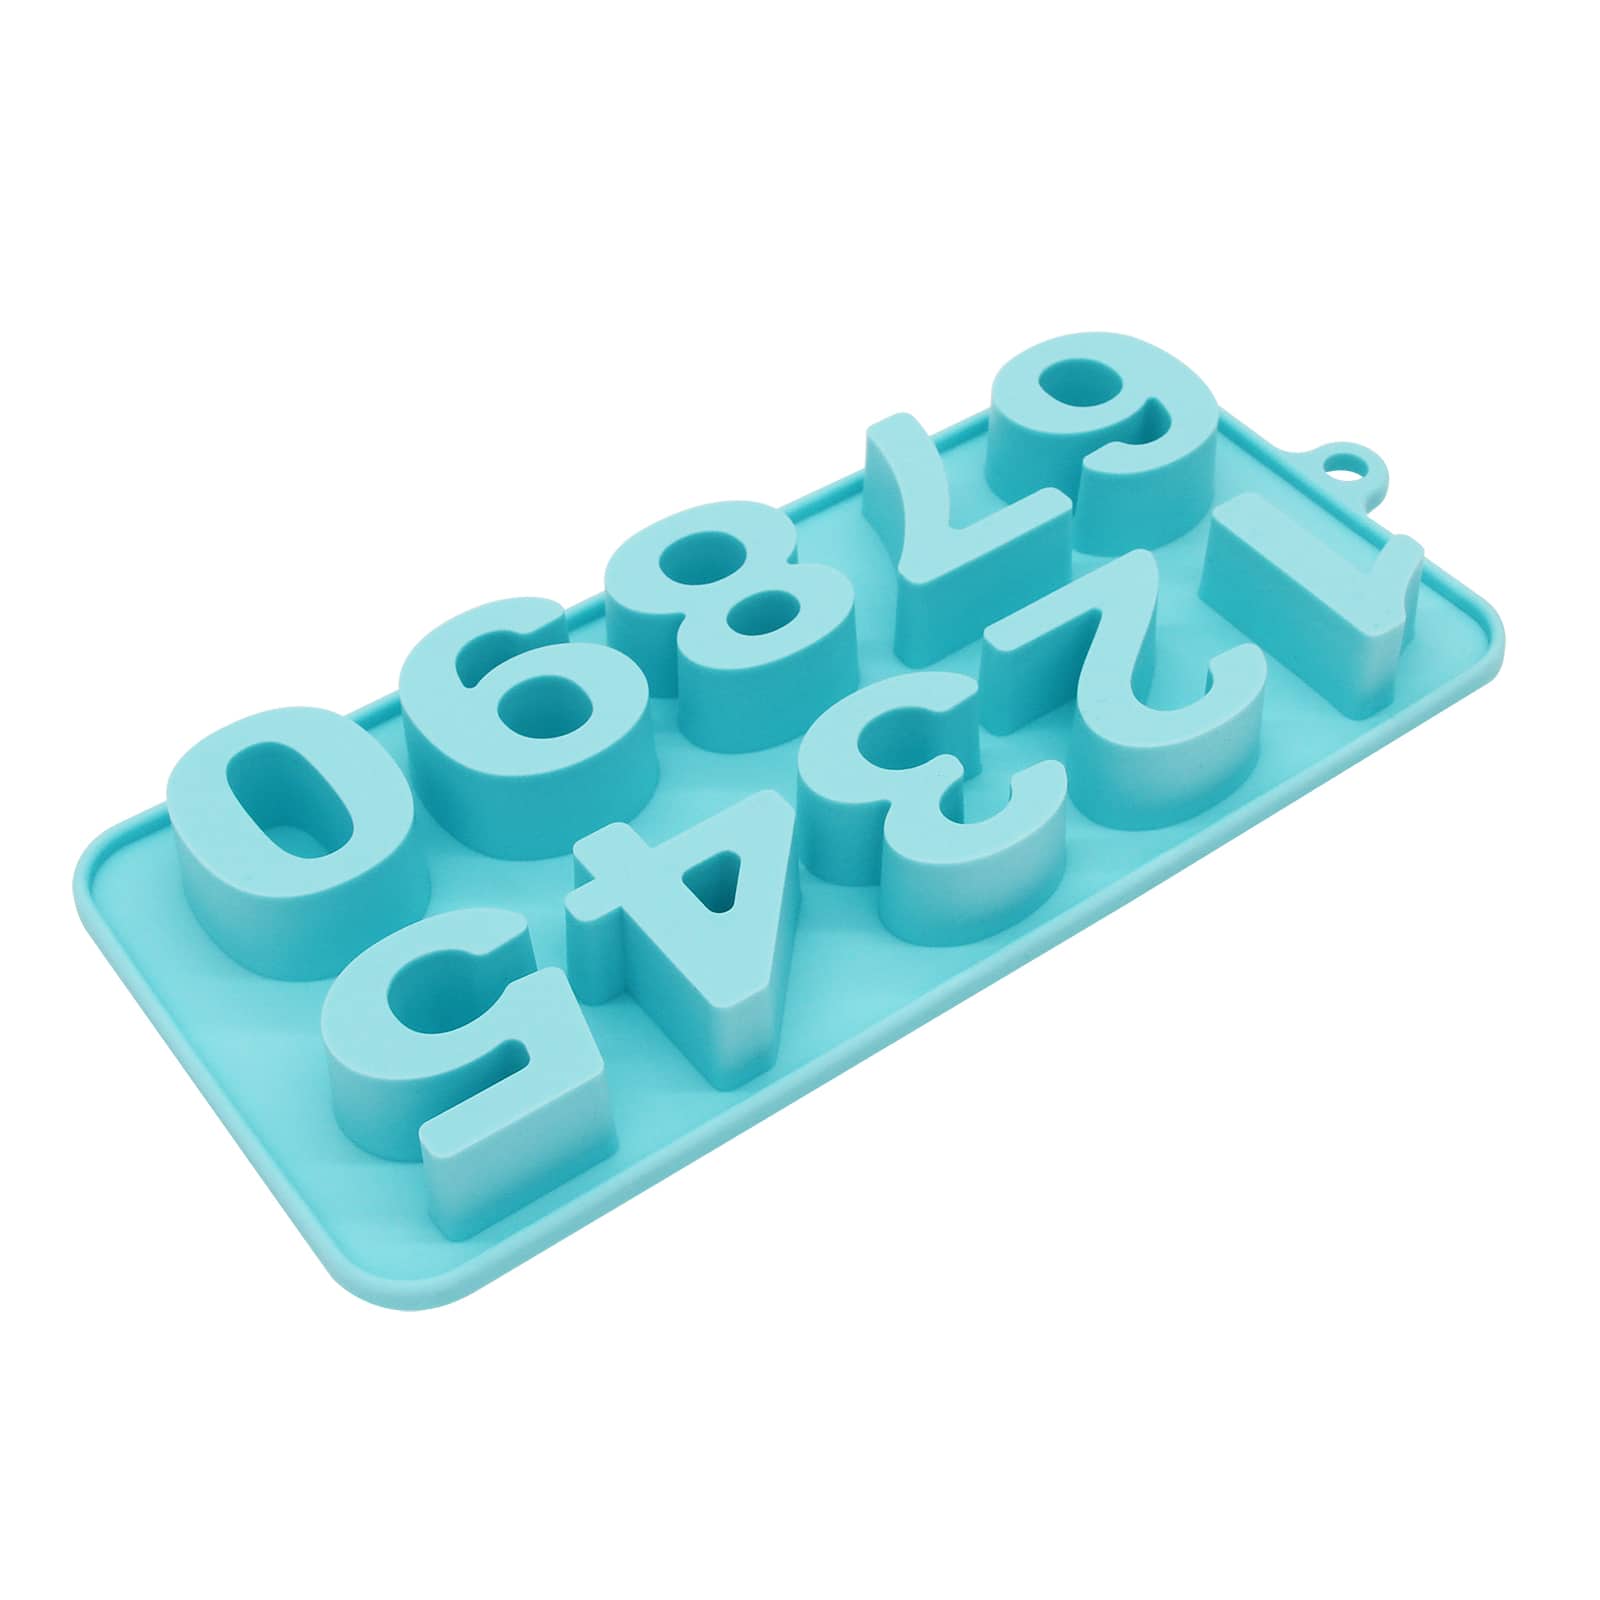 Alphabet Silicone Candy Mold by Celebrate It™